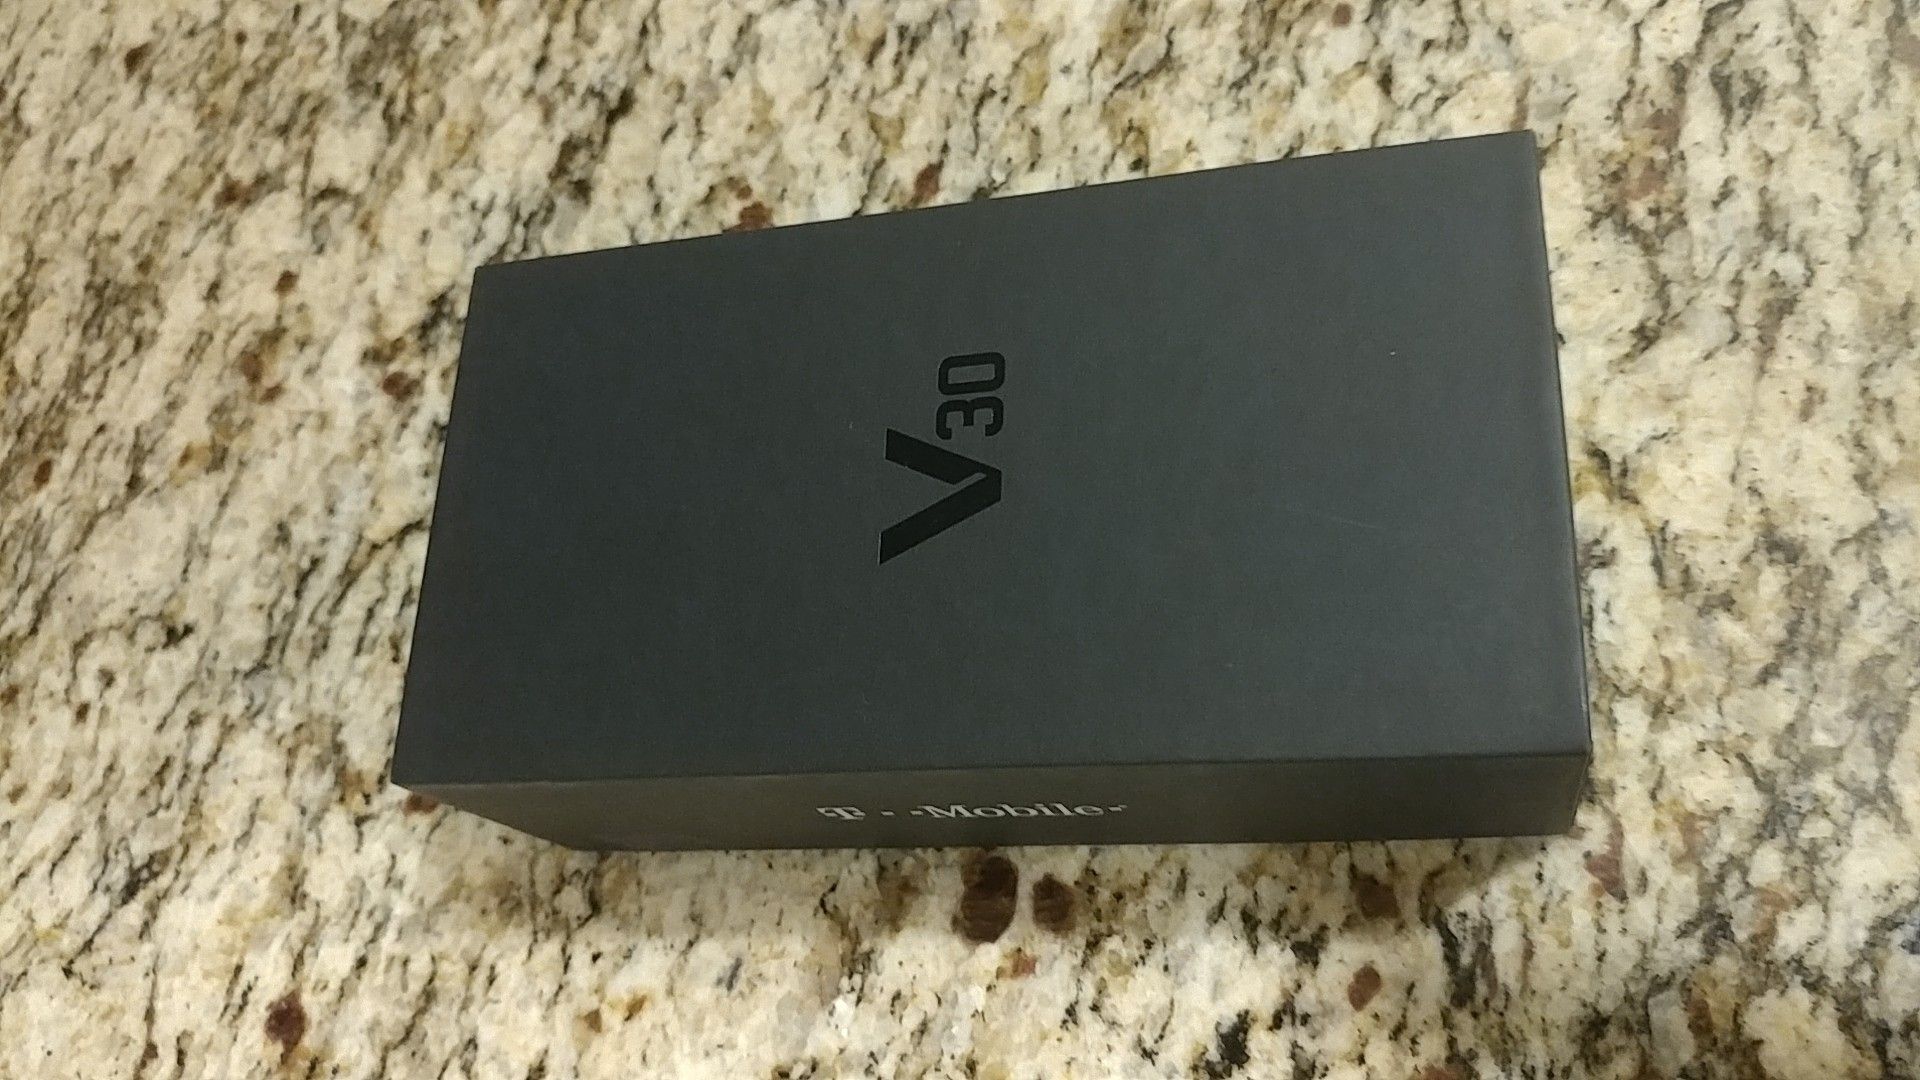 Used LG V30 H932 - 64GB - Silver (T-Mobile) Smartphone - Extra Accessories. Excellent condition.